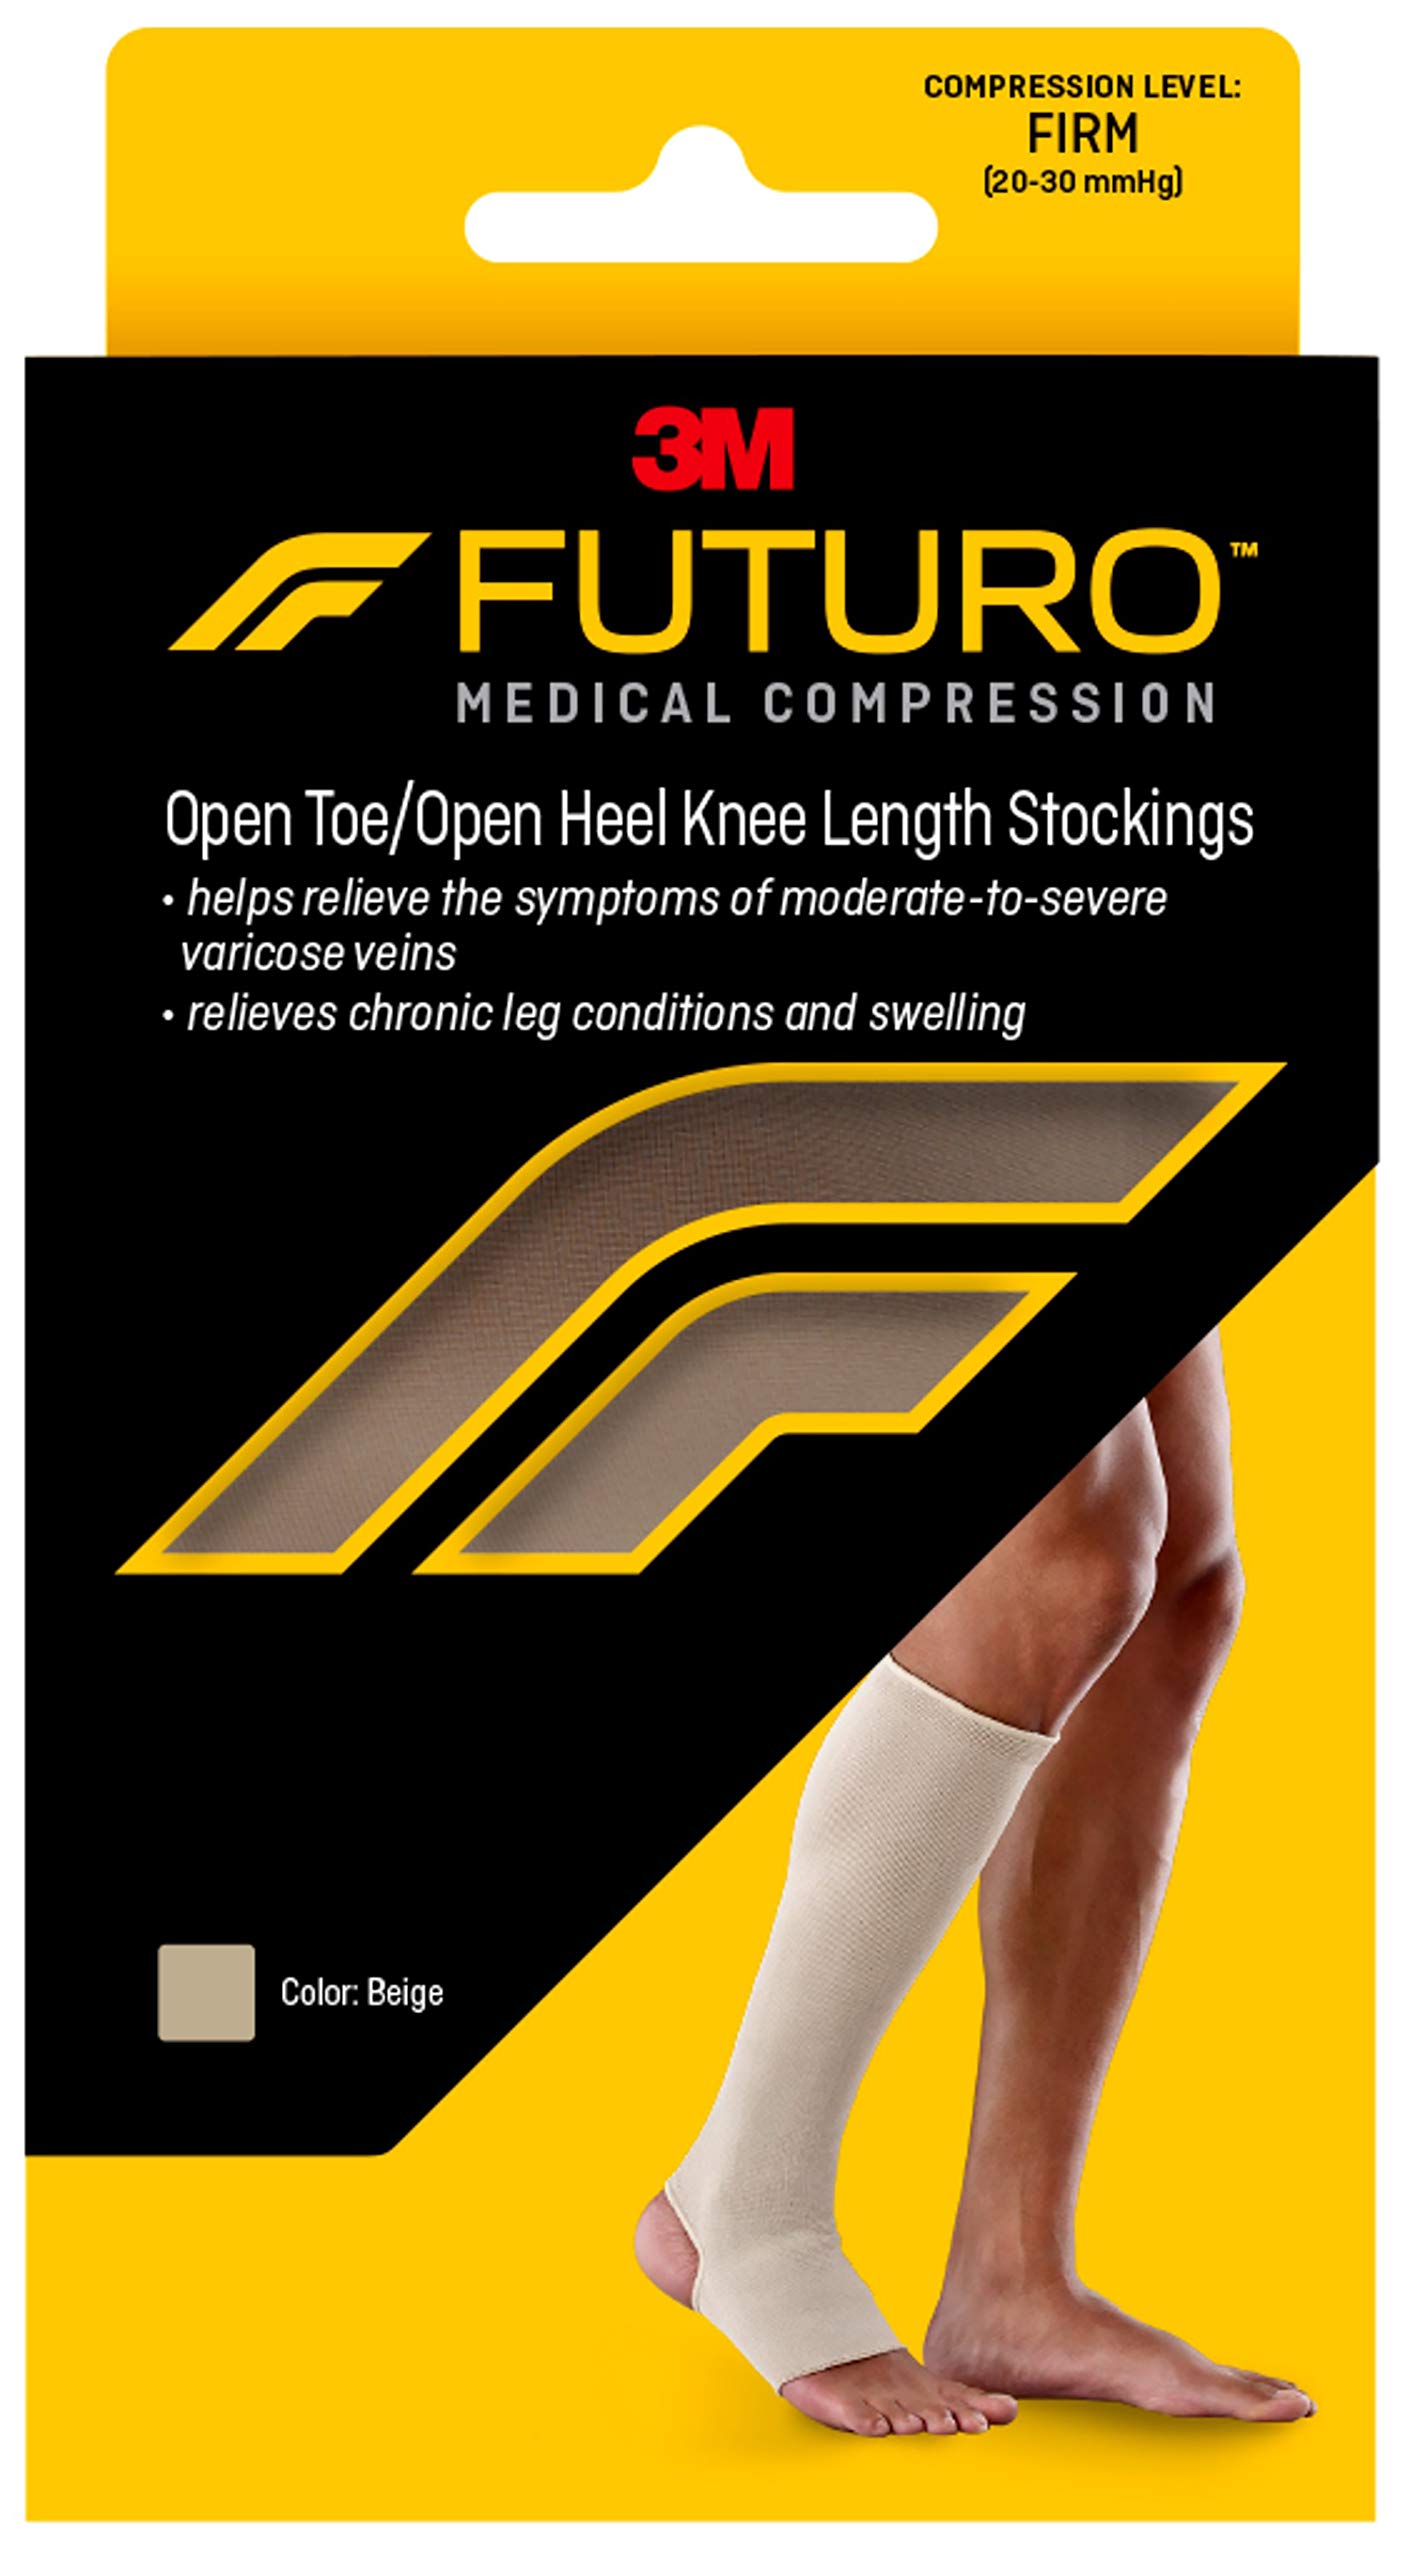 Futuro - MMM-414 Therapeutic Knee Length Stocking for Men/Women, Helps Relieve Symptoms of Mild Spider Veins, Firm Compression, Open Toe/Heel, Large, Beige, 1 Count